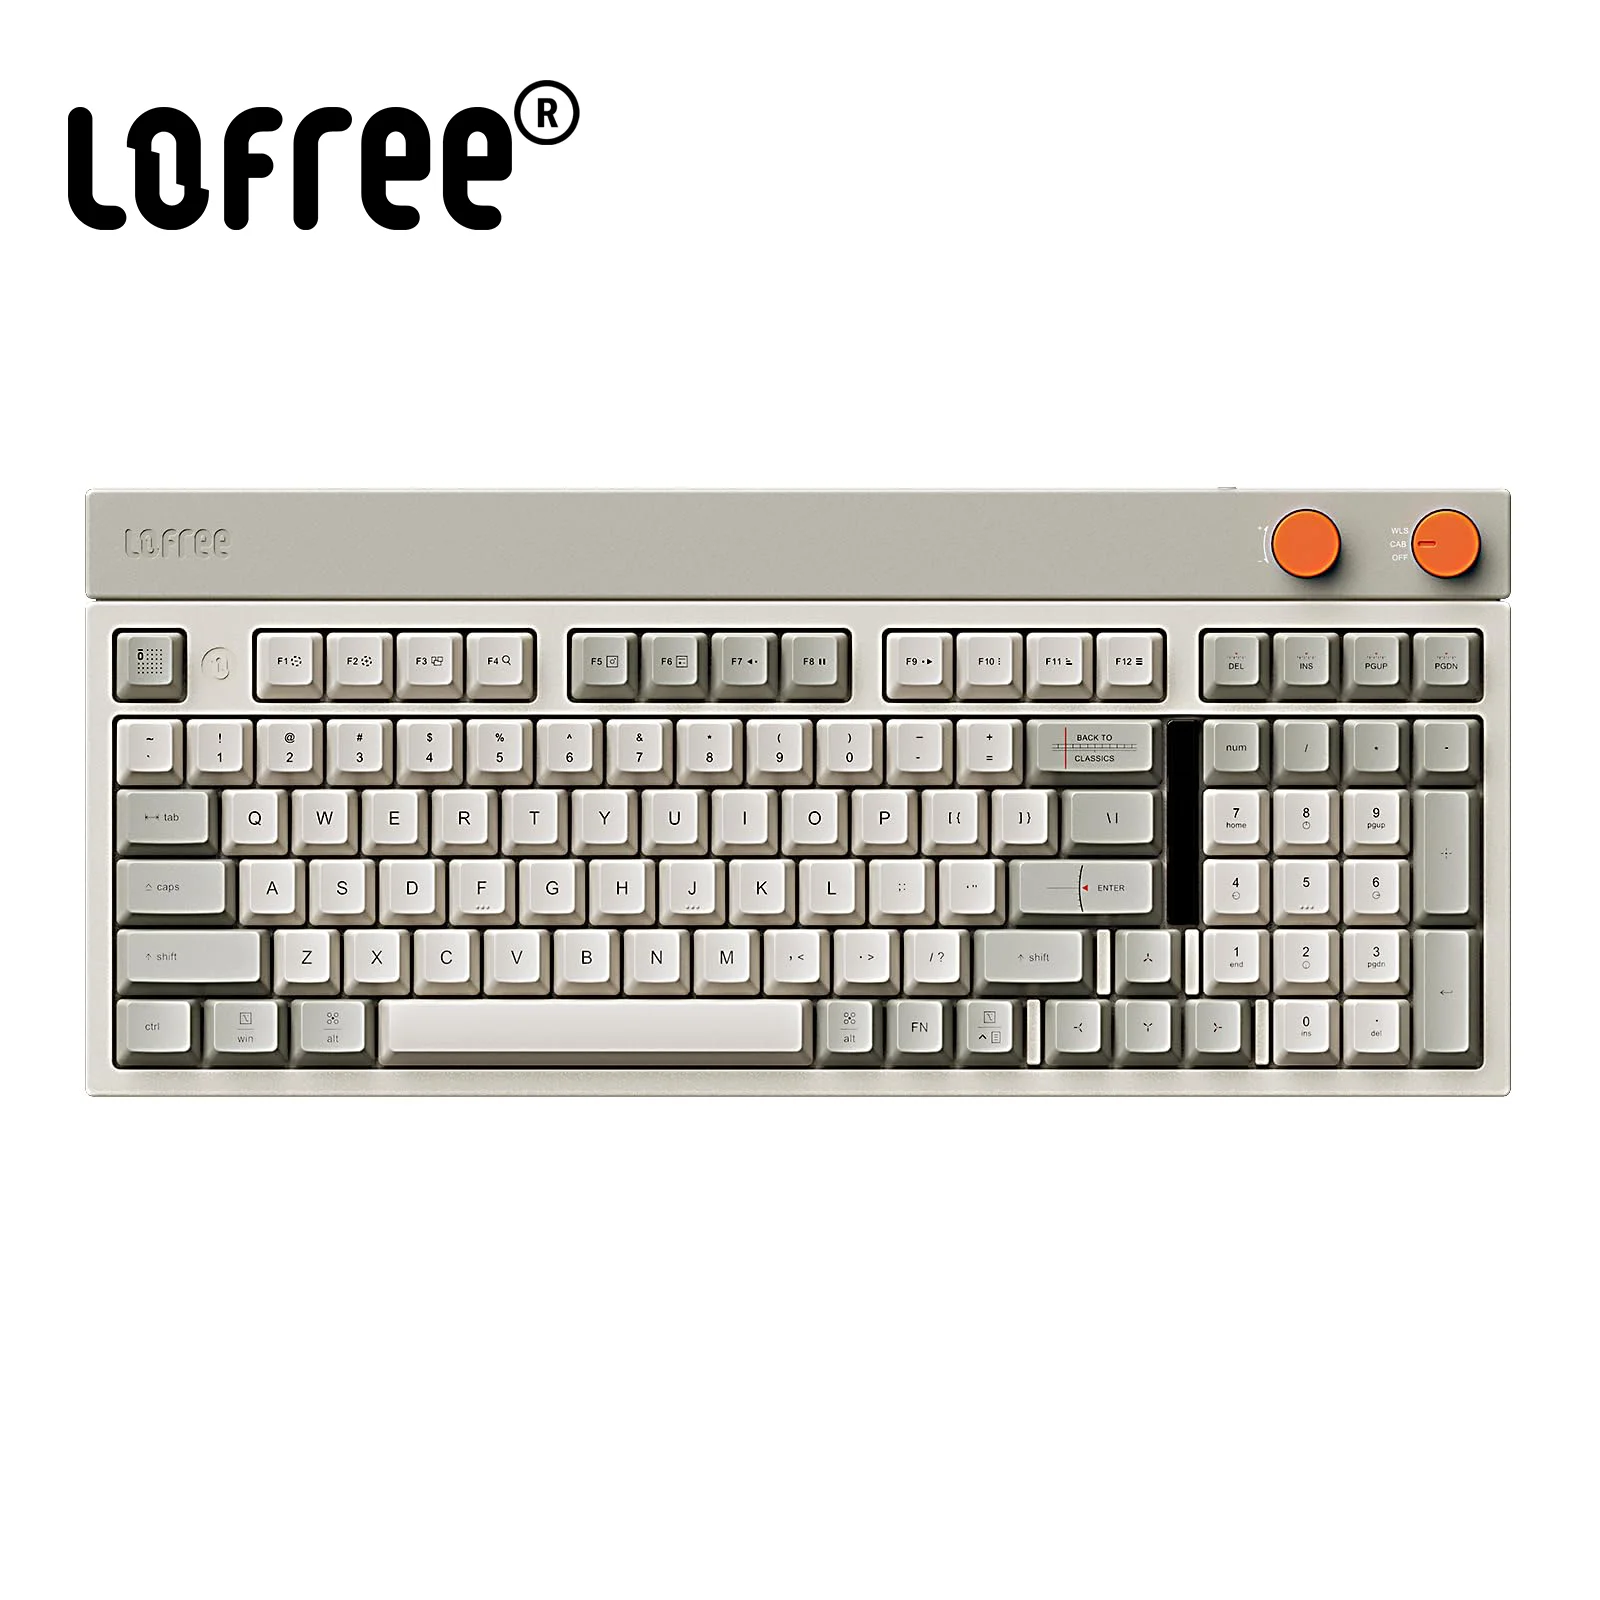 

LOFREE Block Wireless Mechanical Keyboard 98Keys Rechargeable Hot-swappable Keyboards 3 Types Connection for Volume Control Mode